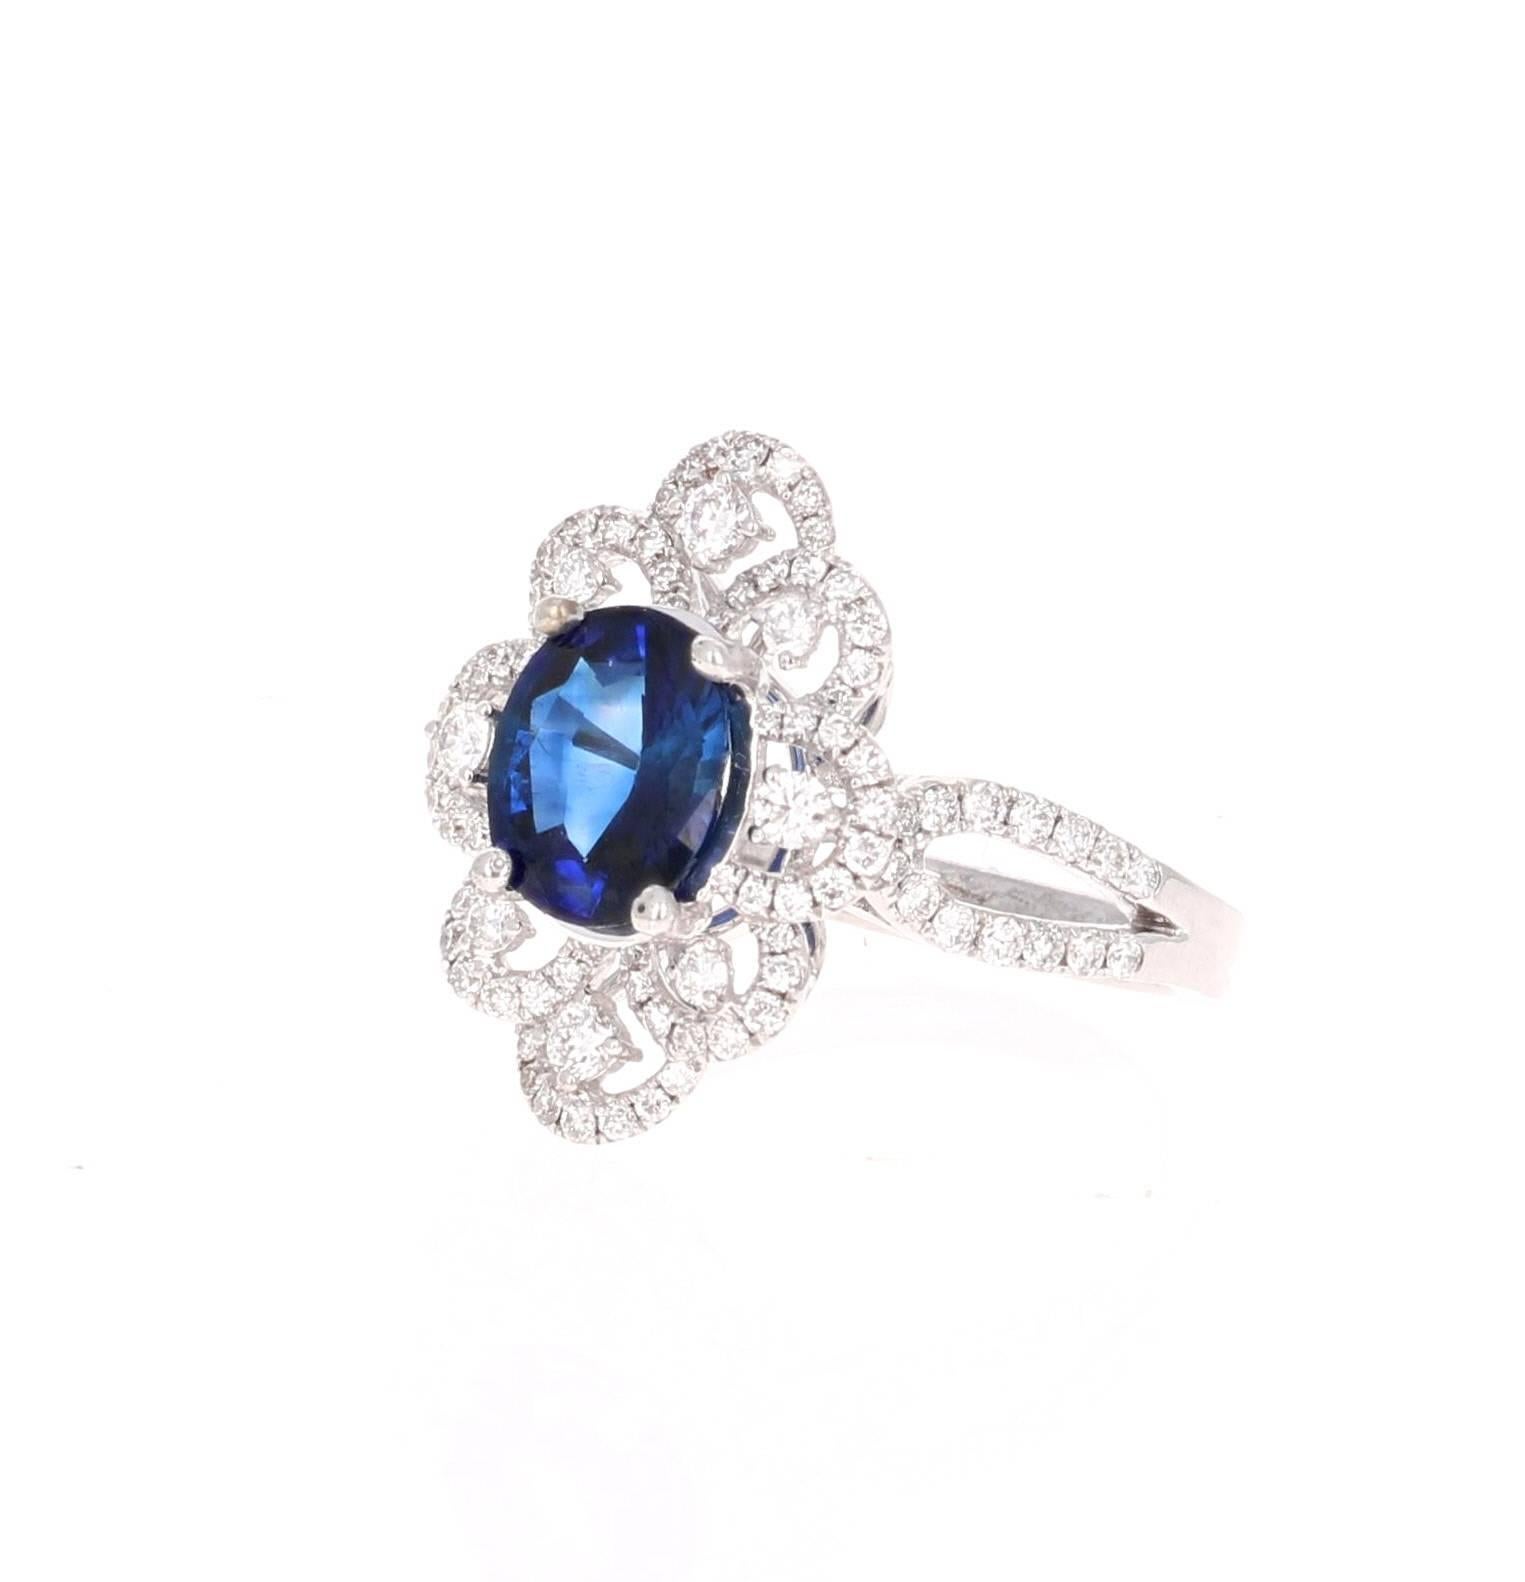 Gorgeous Engagement ring or Cocktail ring!   This beautiful setting has a 2.00 carat Oval cut Sapphire in the center of the ring and is surrounded by 102 Round Cut Diamonds that weigh 0.79 carats (Clarity: VS2, Color:F).  The total carat weight of